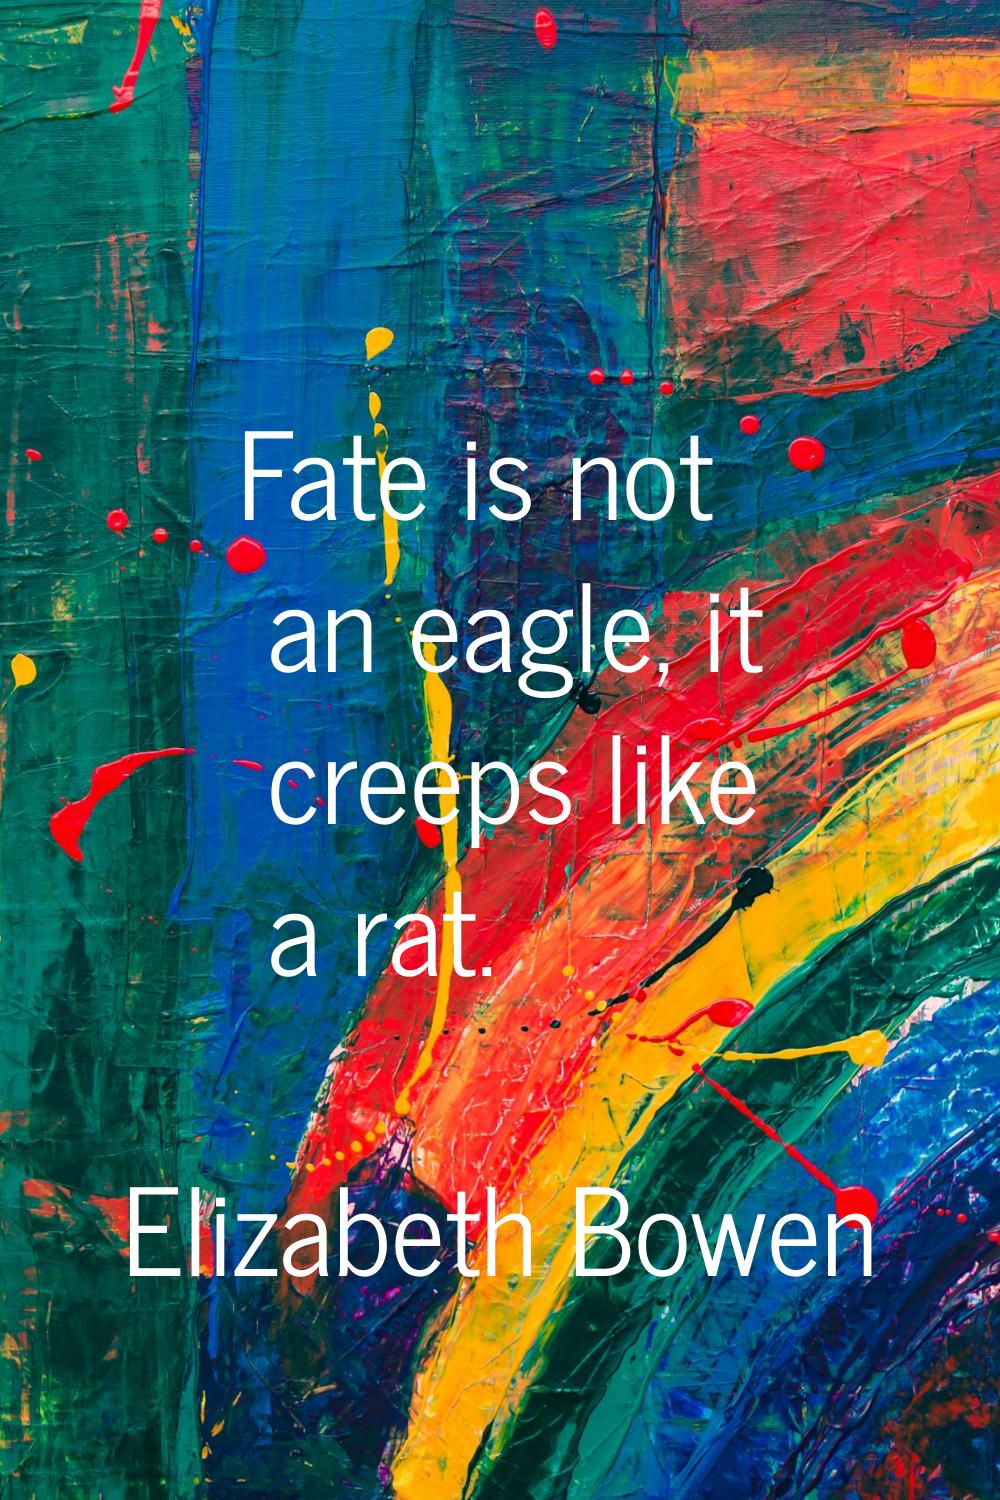 Fate is not an eagle, it creeps like a rat.